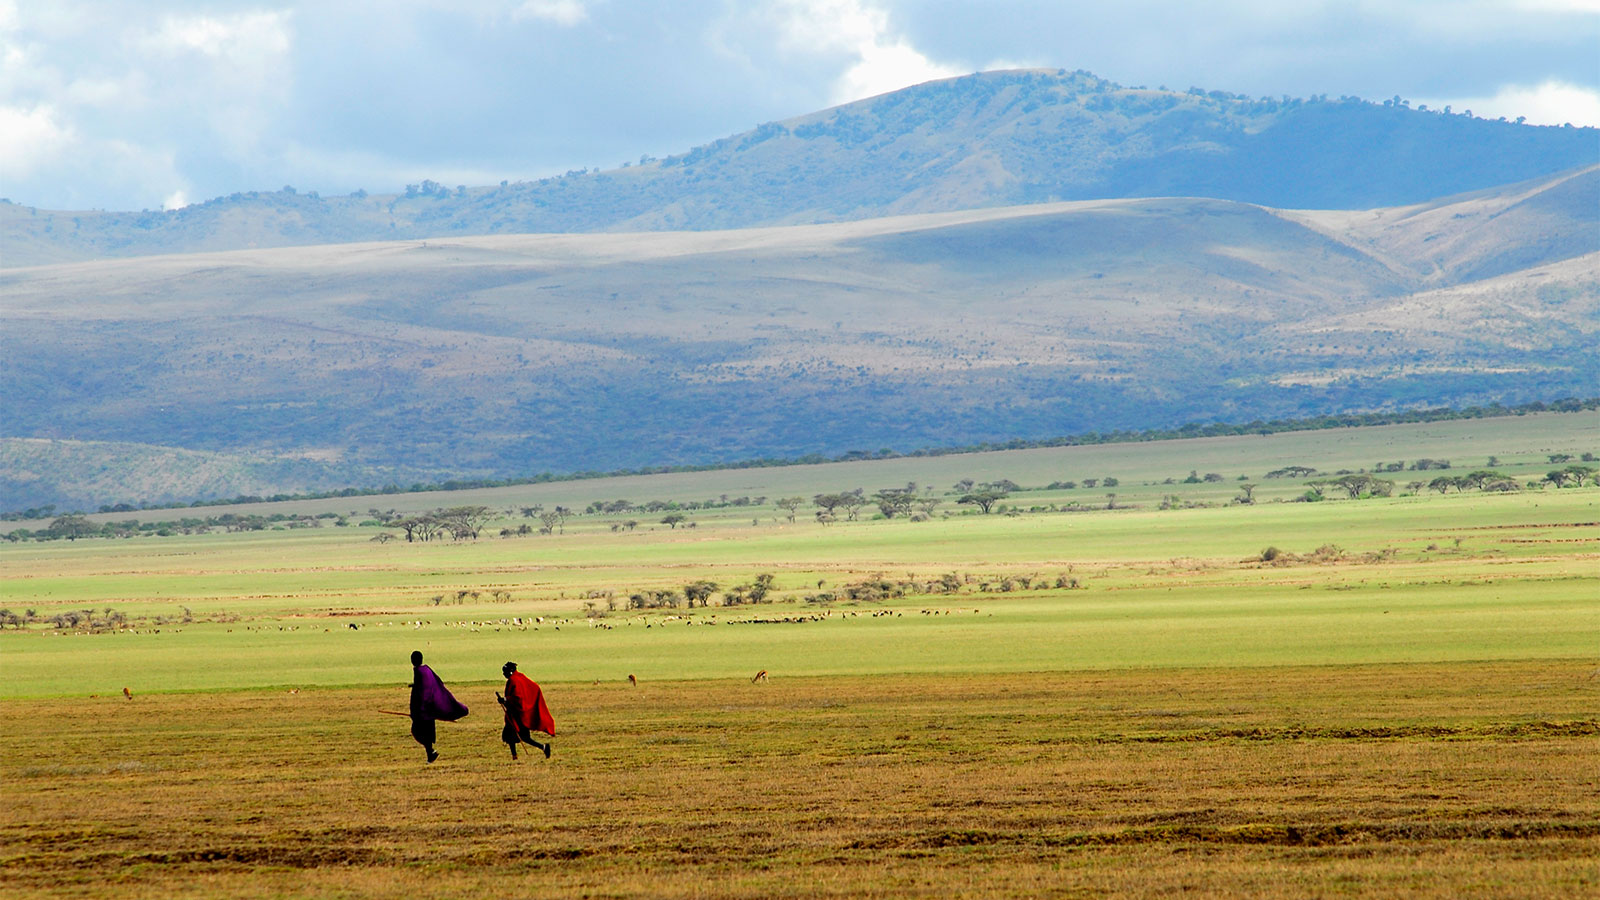 Two Maasai people wearing brightly colored clothing walking on a field with mountains rising in the distance